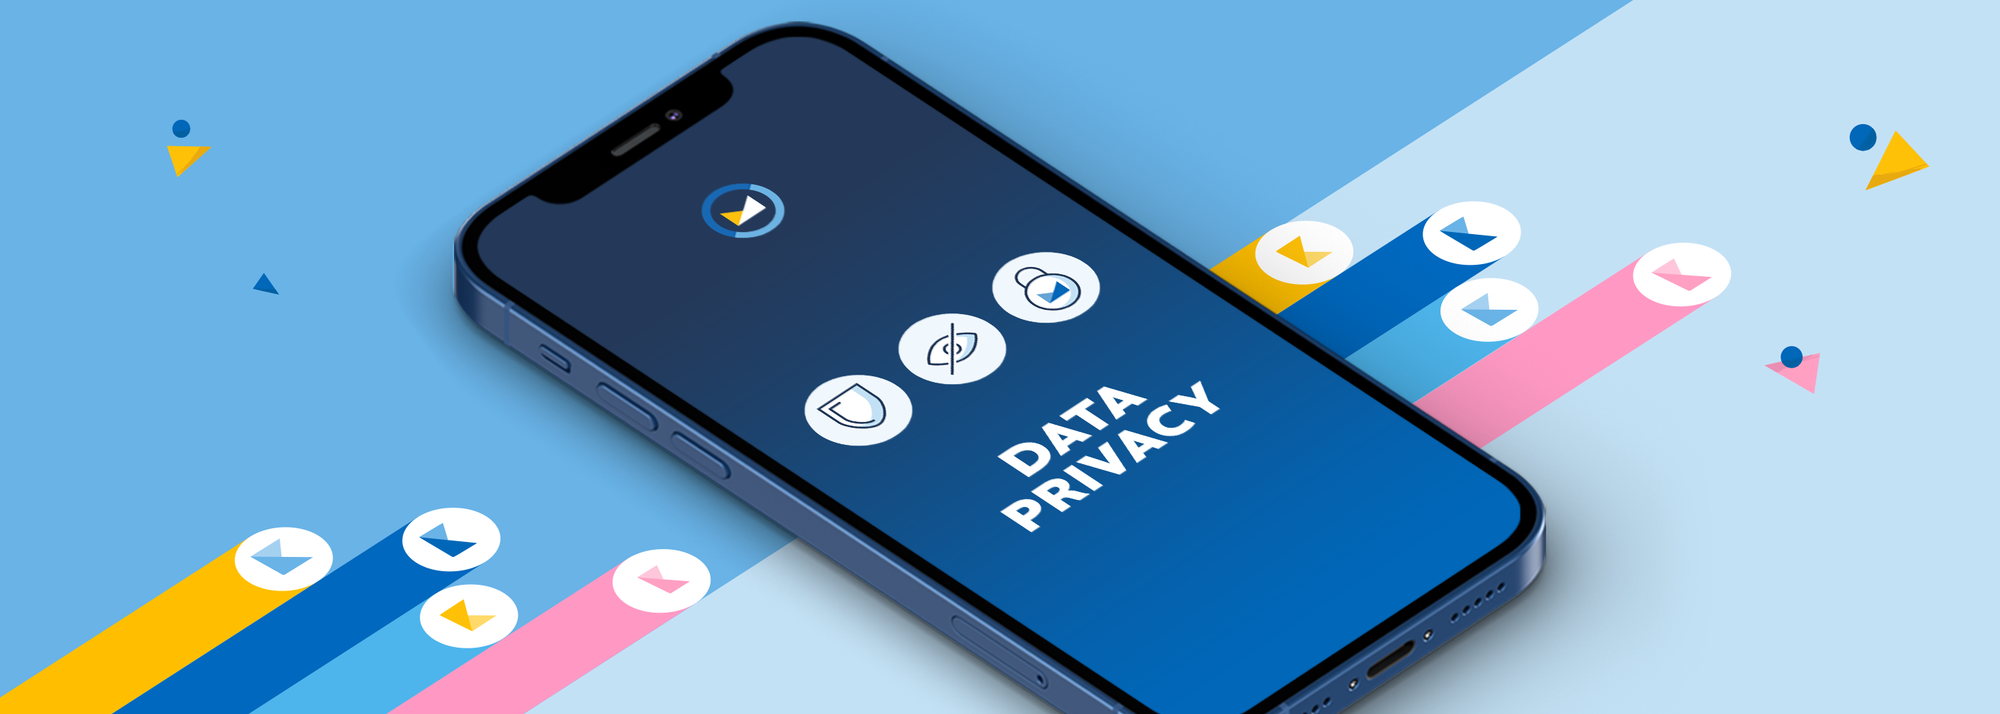 Blog Data Privacy Day 2021—5 Simple Steps to Increase Your Data Privacy Hero Image